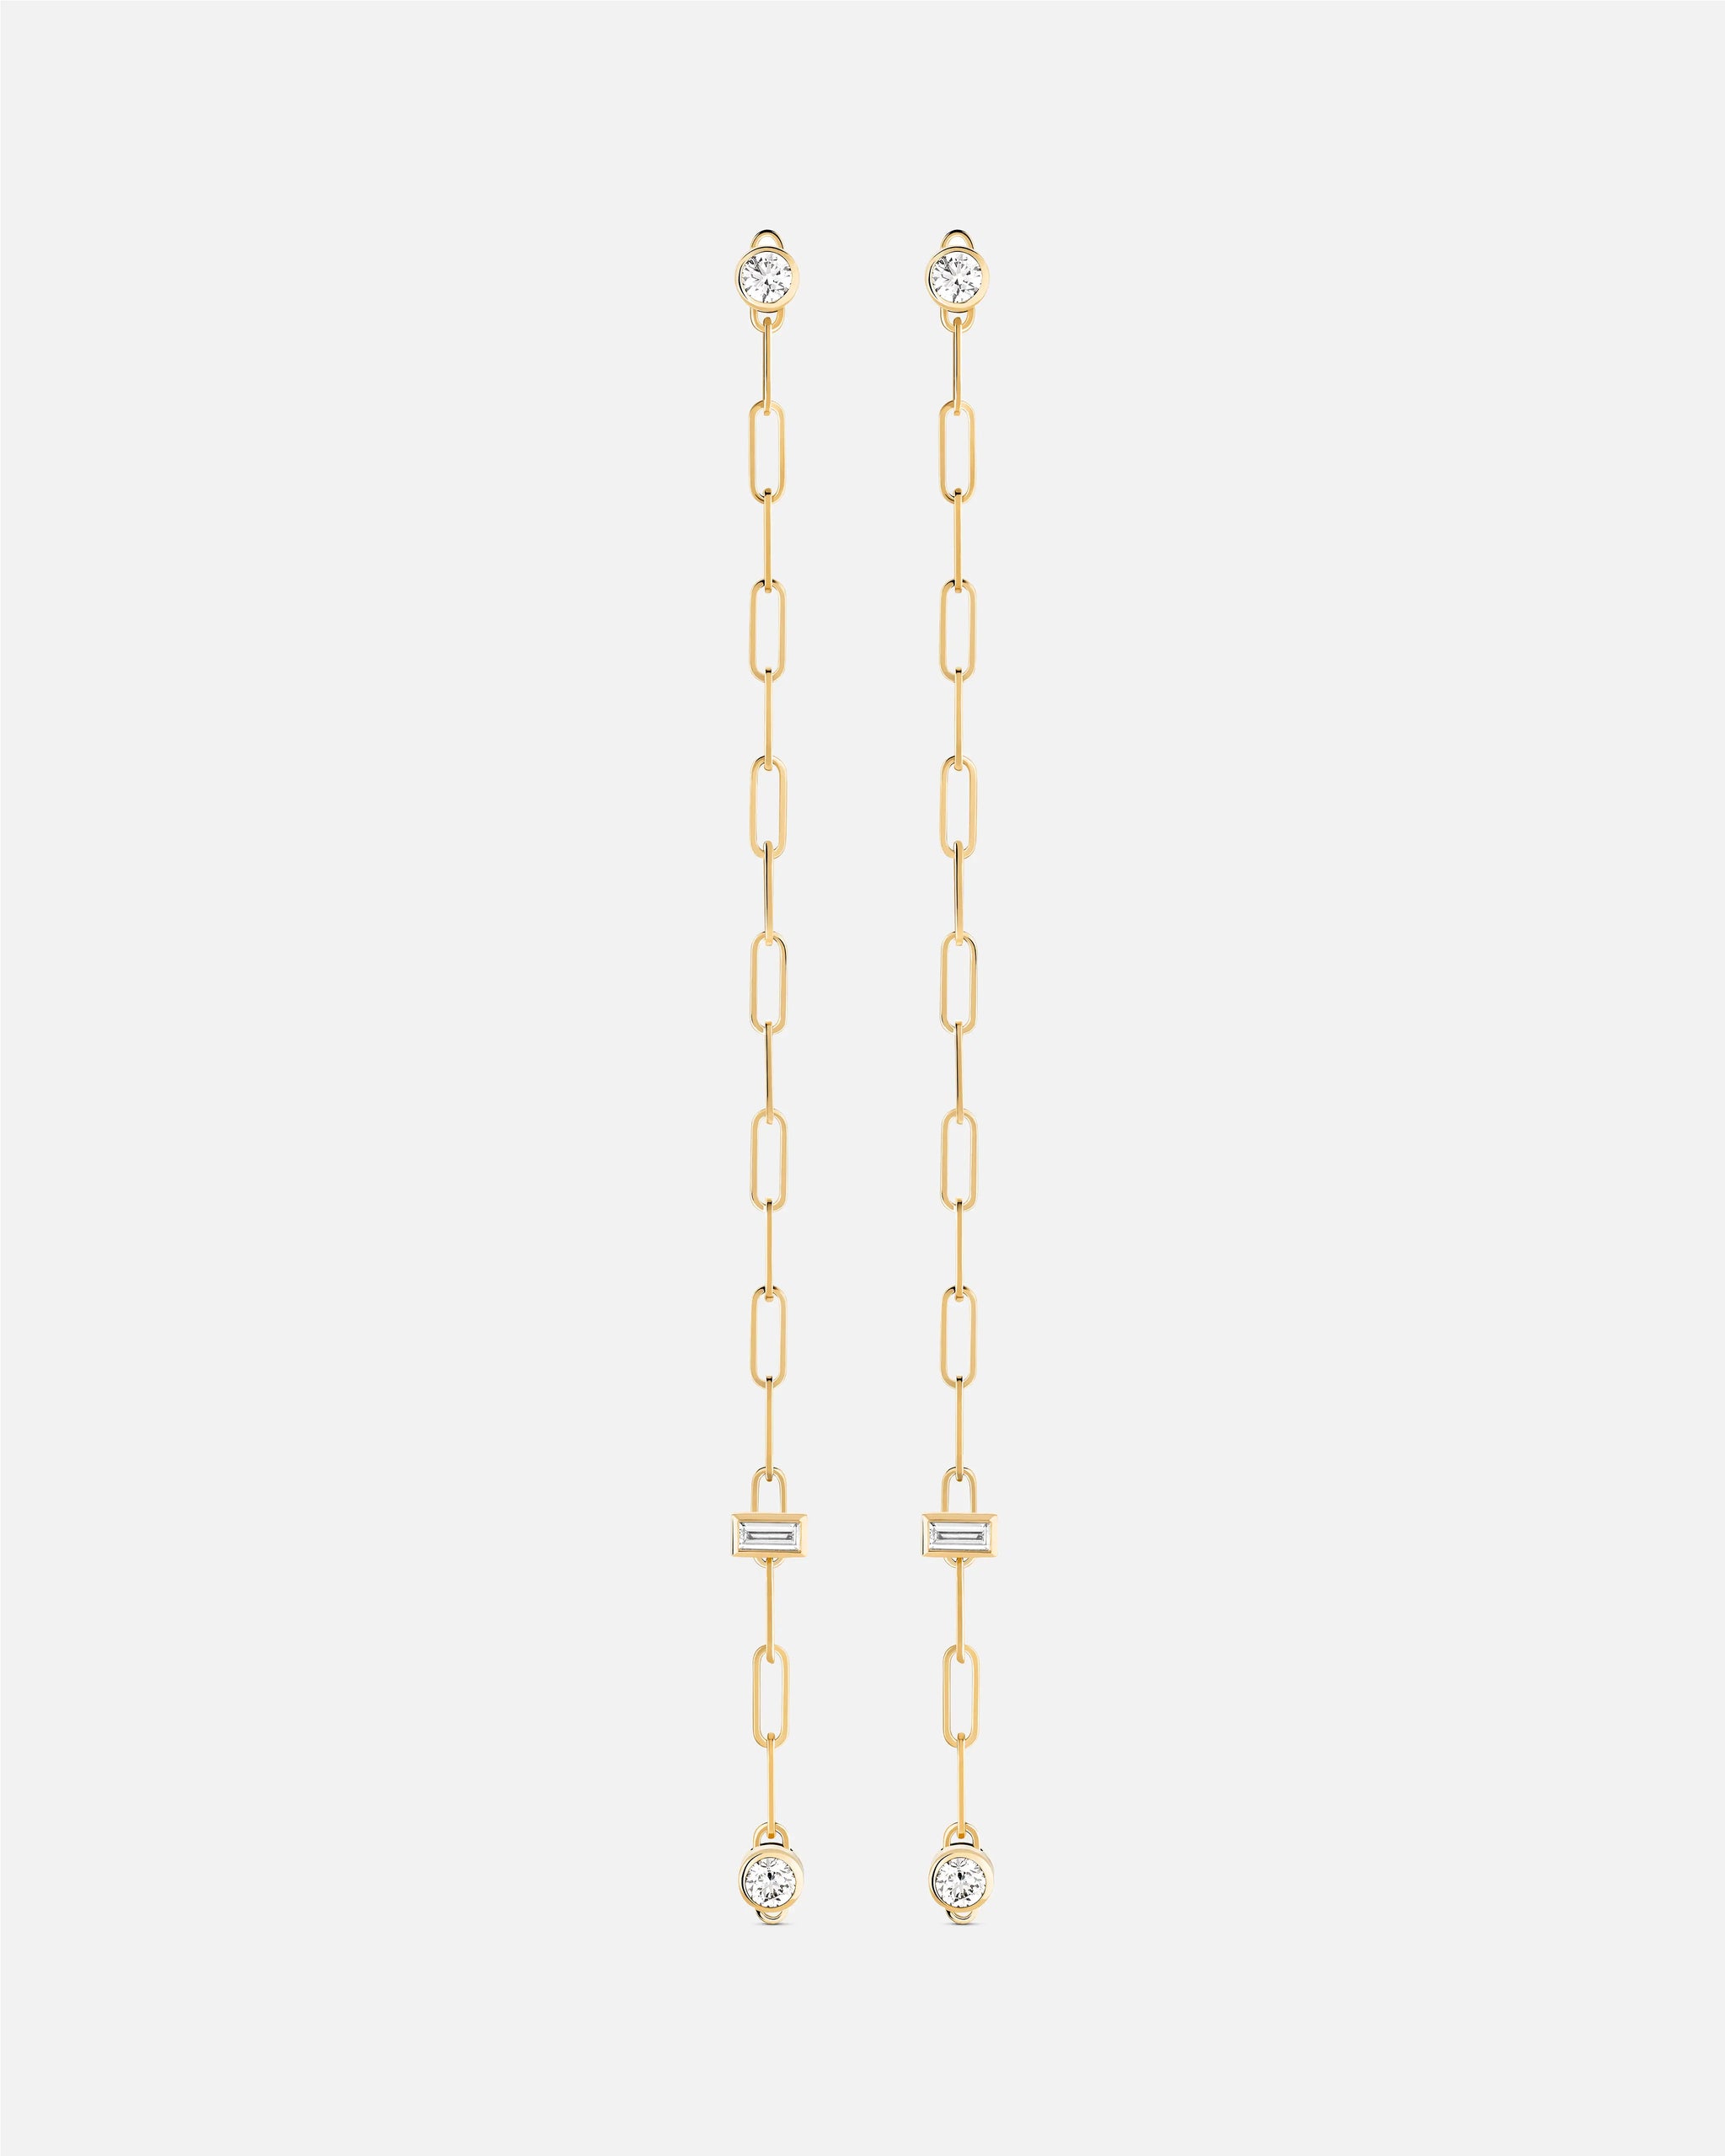 Baguette Round GM Classics Earrings in Yellow Gold - 1 - Nouvel Heritage